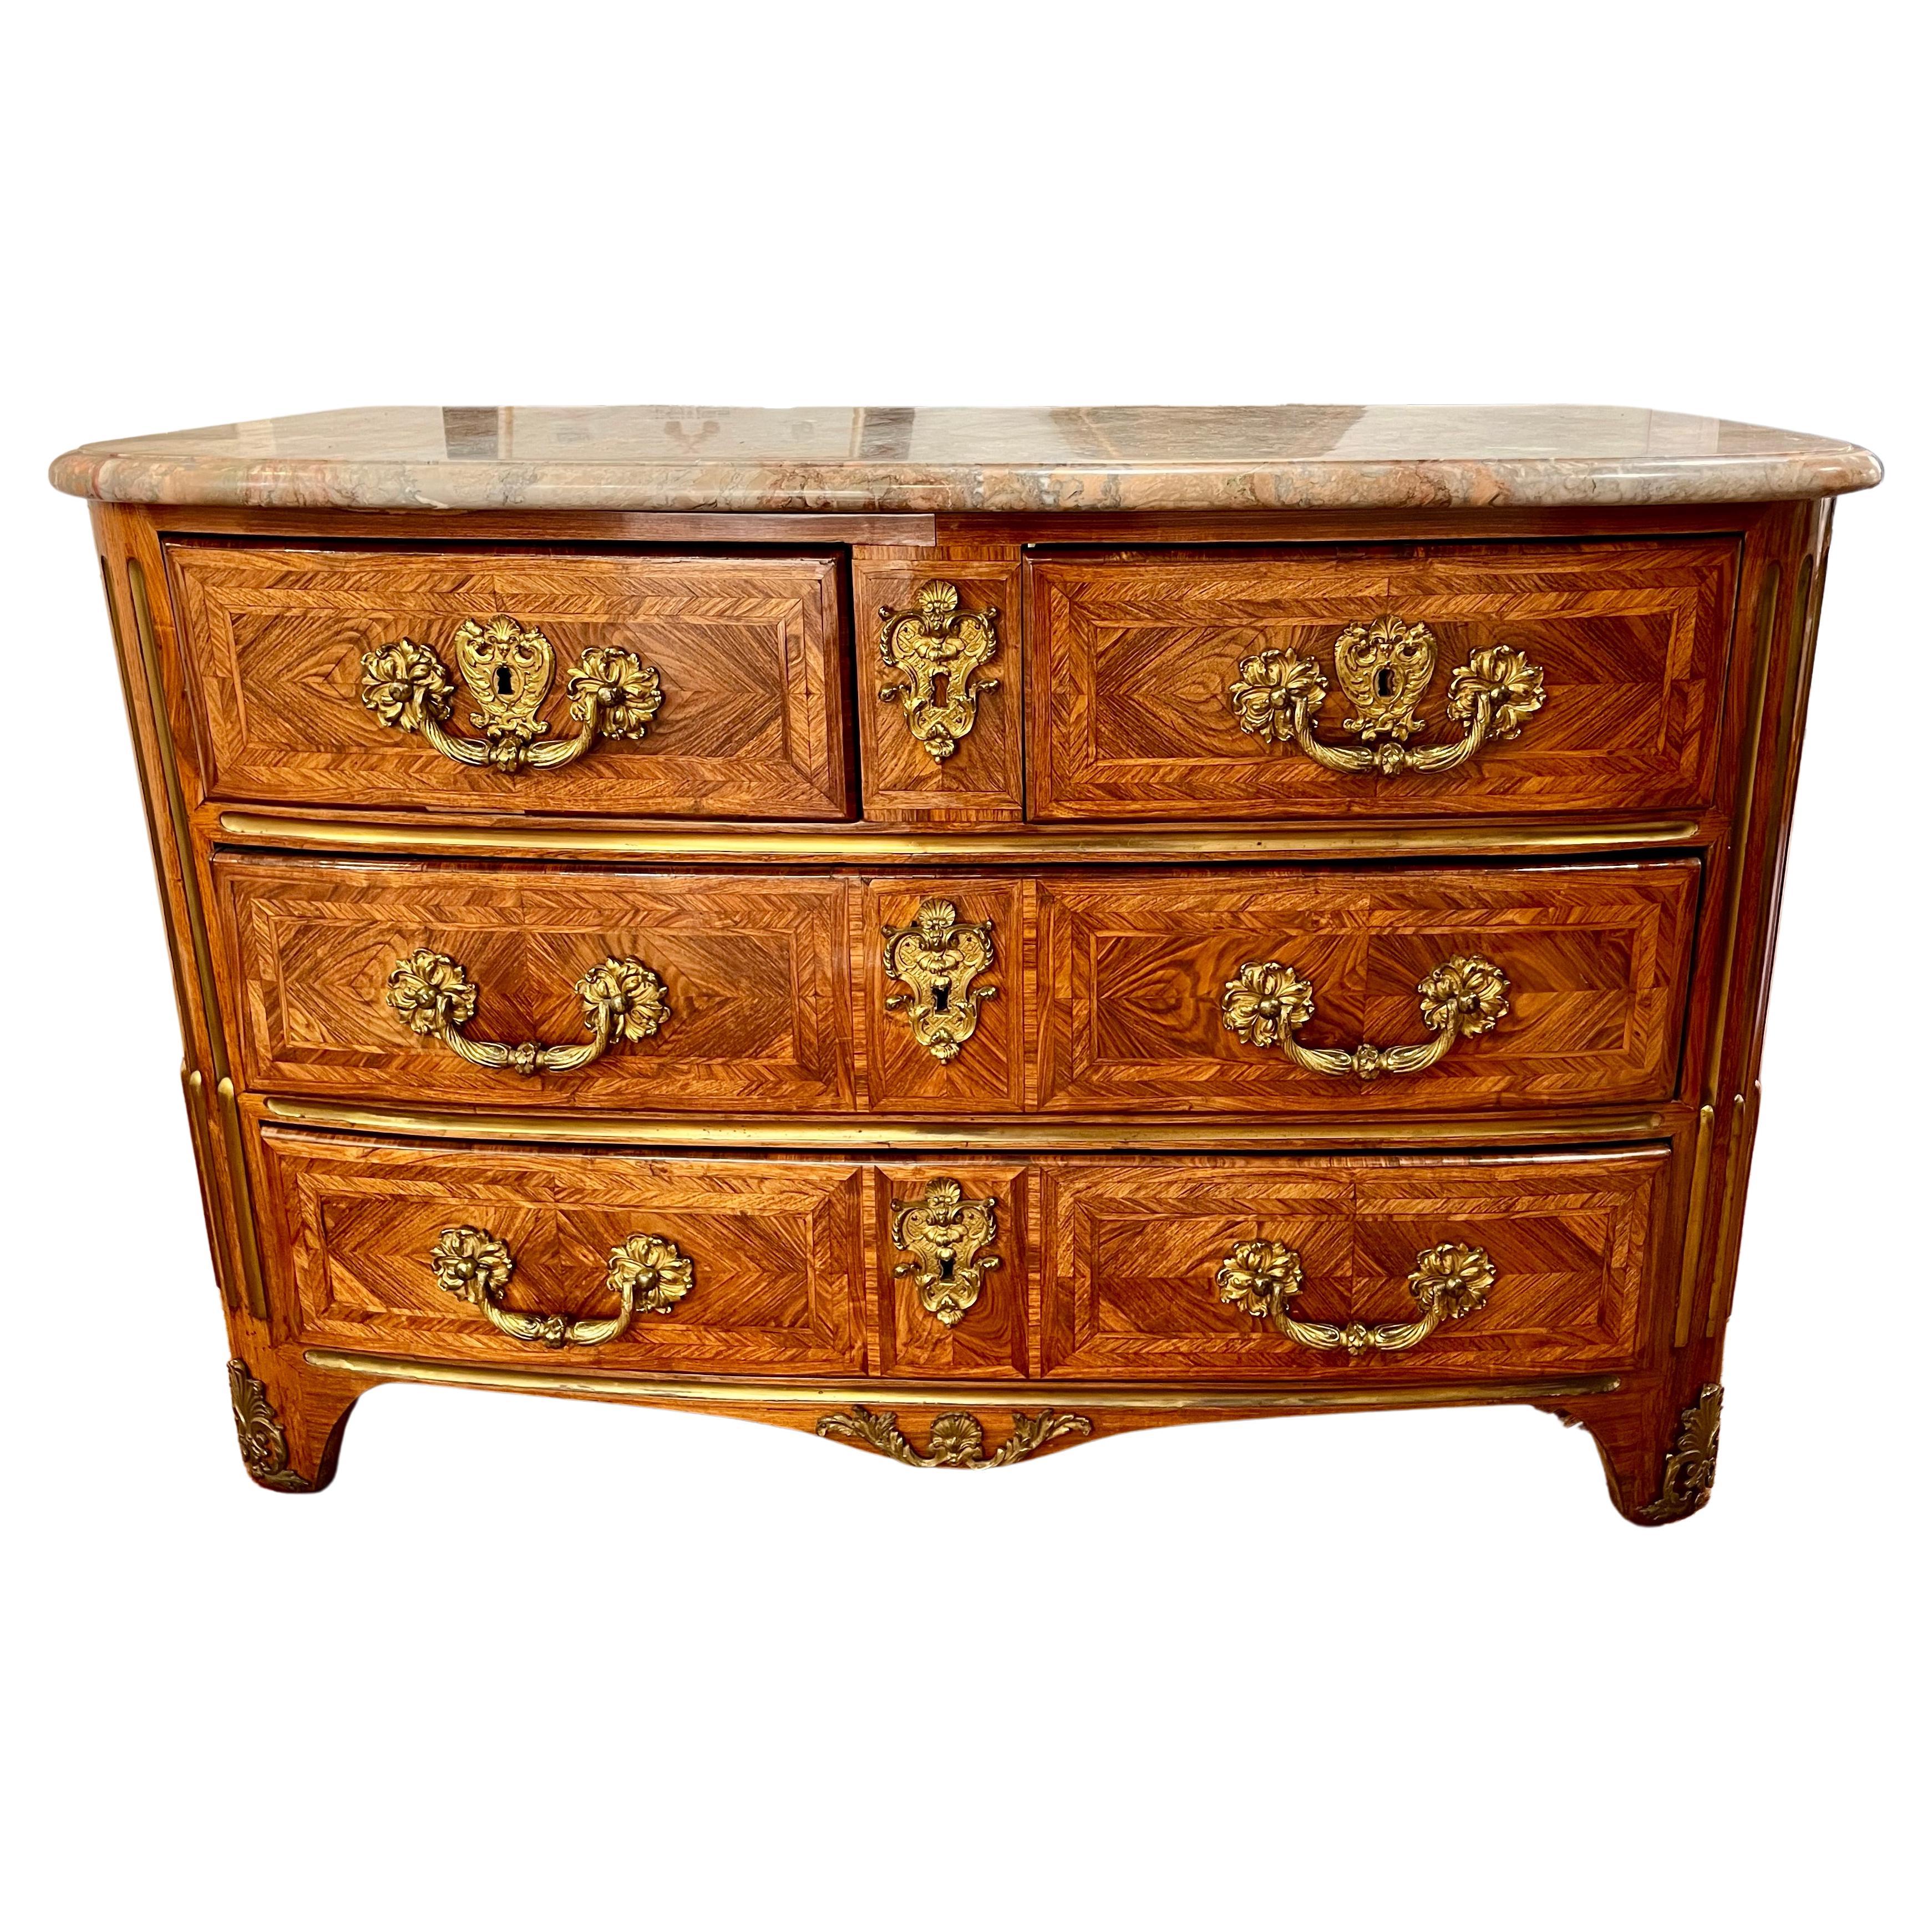 French Regence Tulipwood and Kingwood Parquetry Commode For Sale